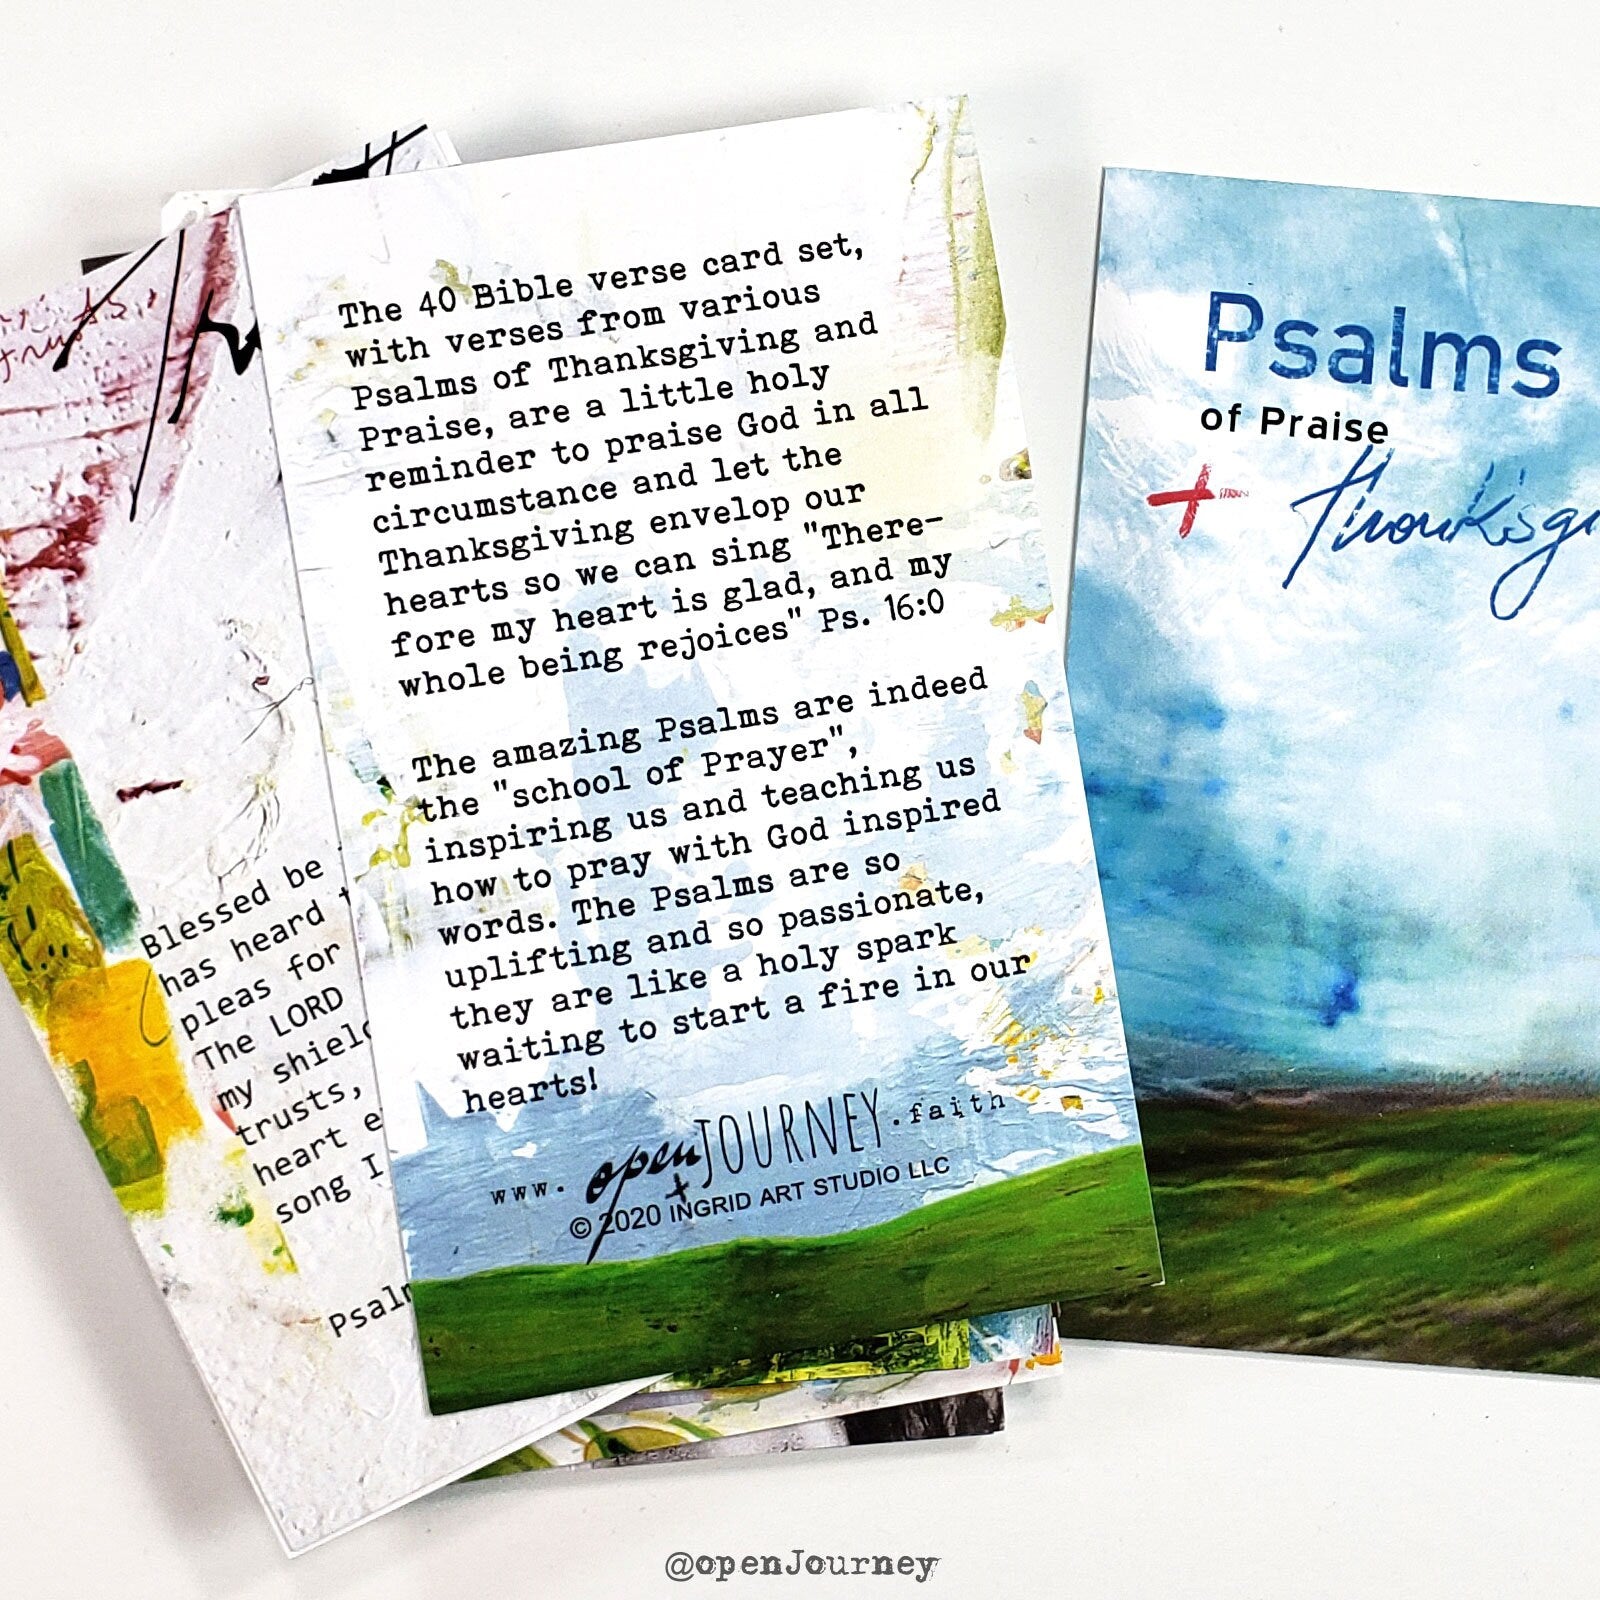 Psalms of Praise and Thanksgiving - set of 40 Bible verse cards